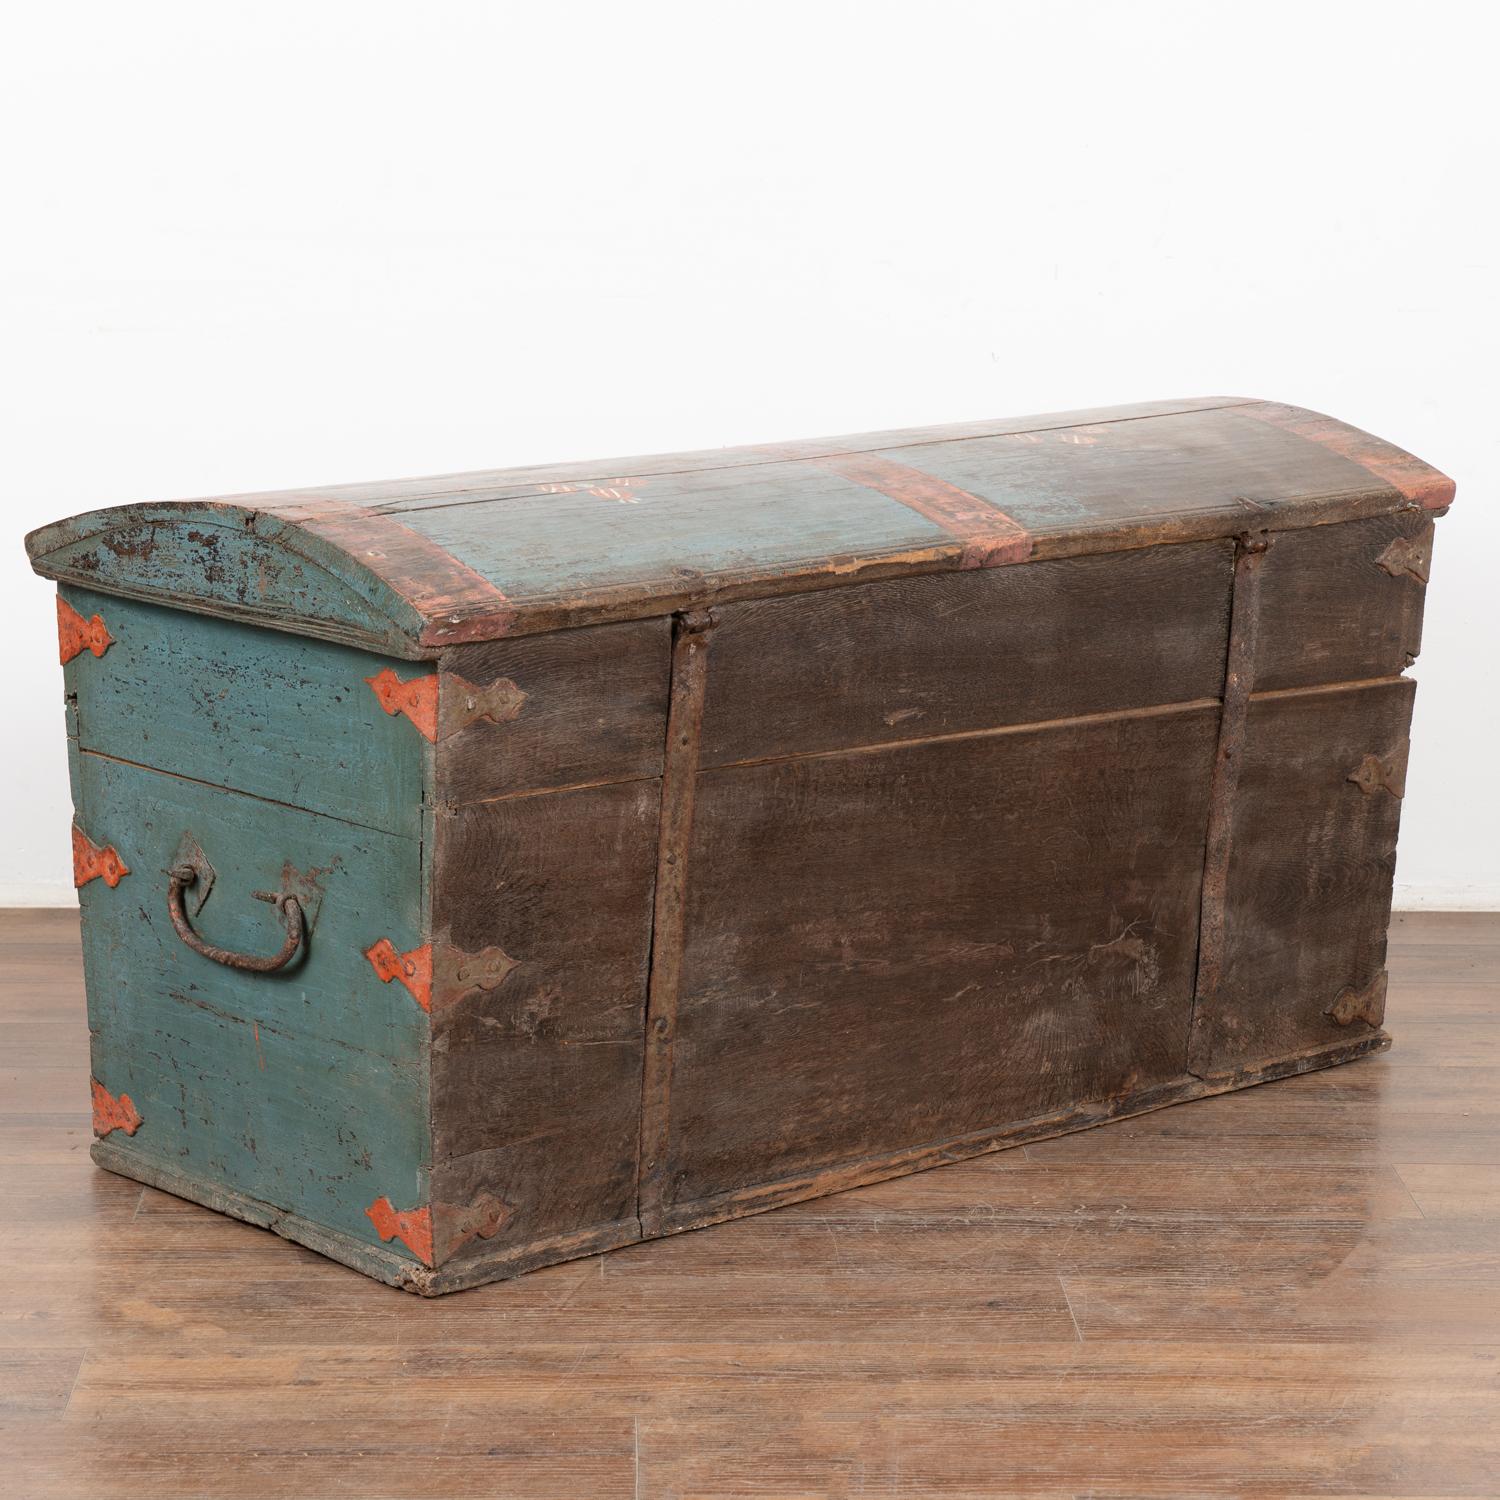 Original Blue Painted Dome Top Trunk from Sweden dated 1804 For Sale 6